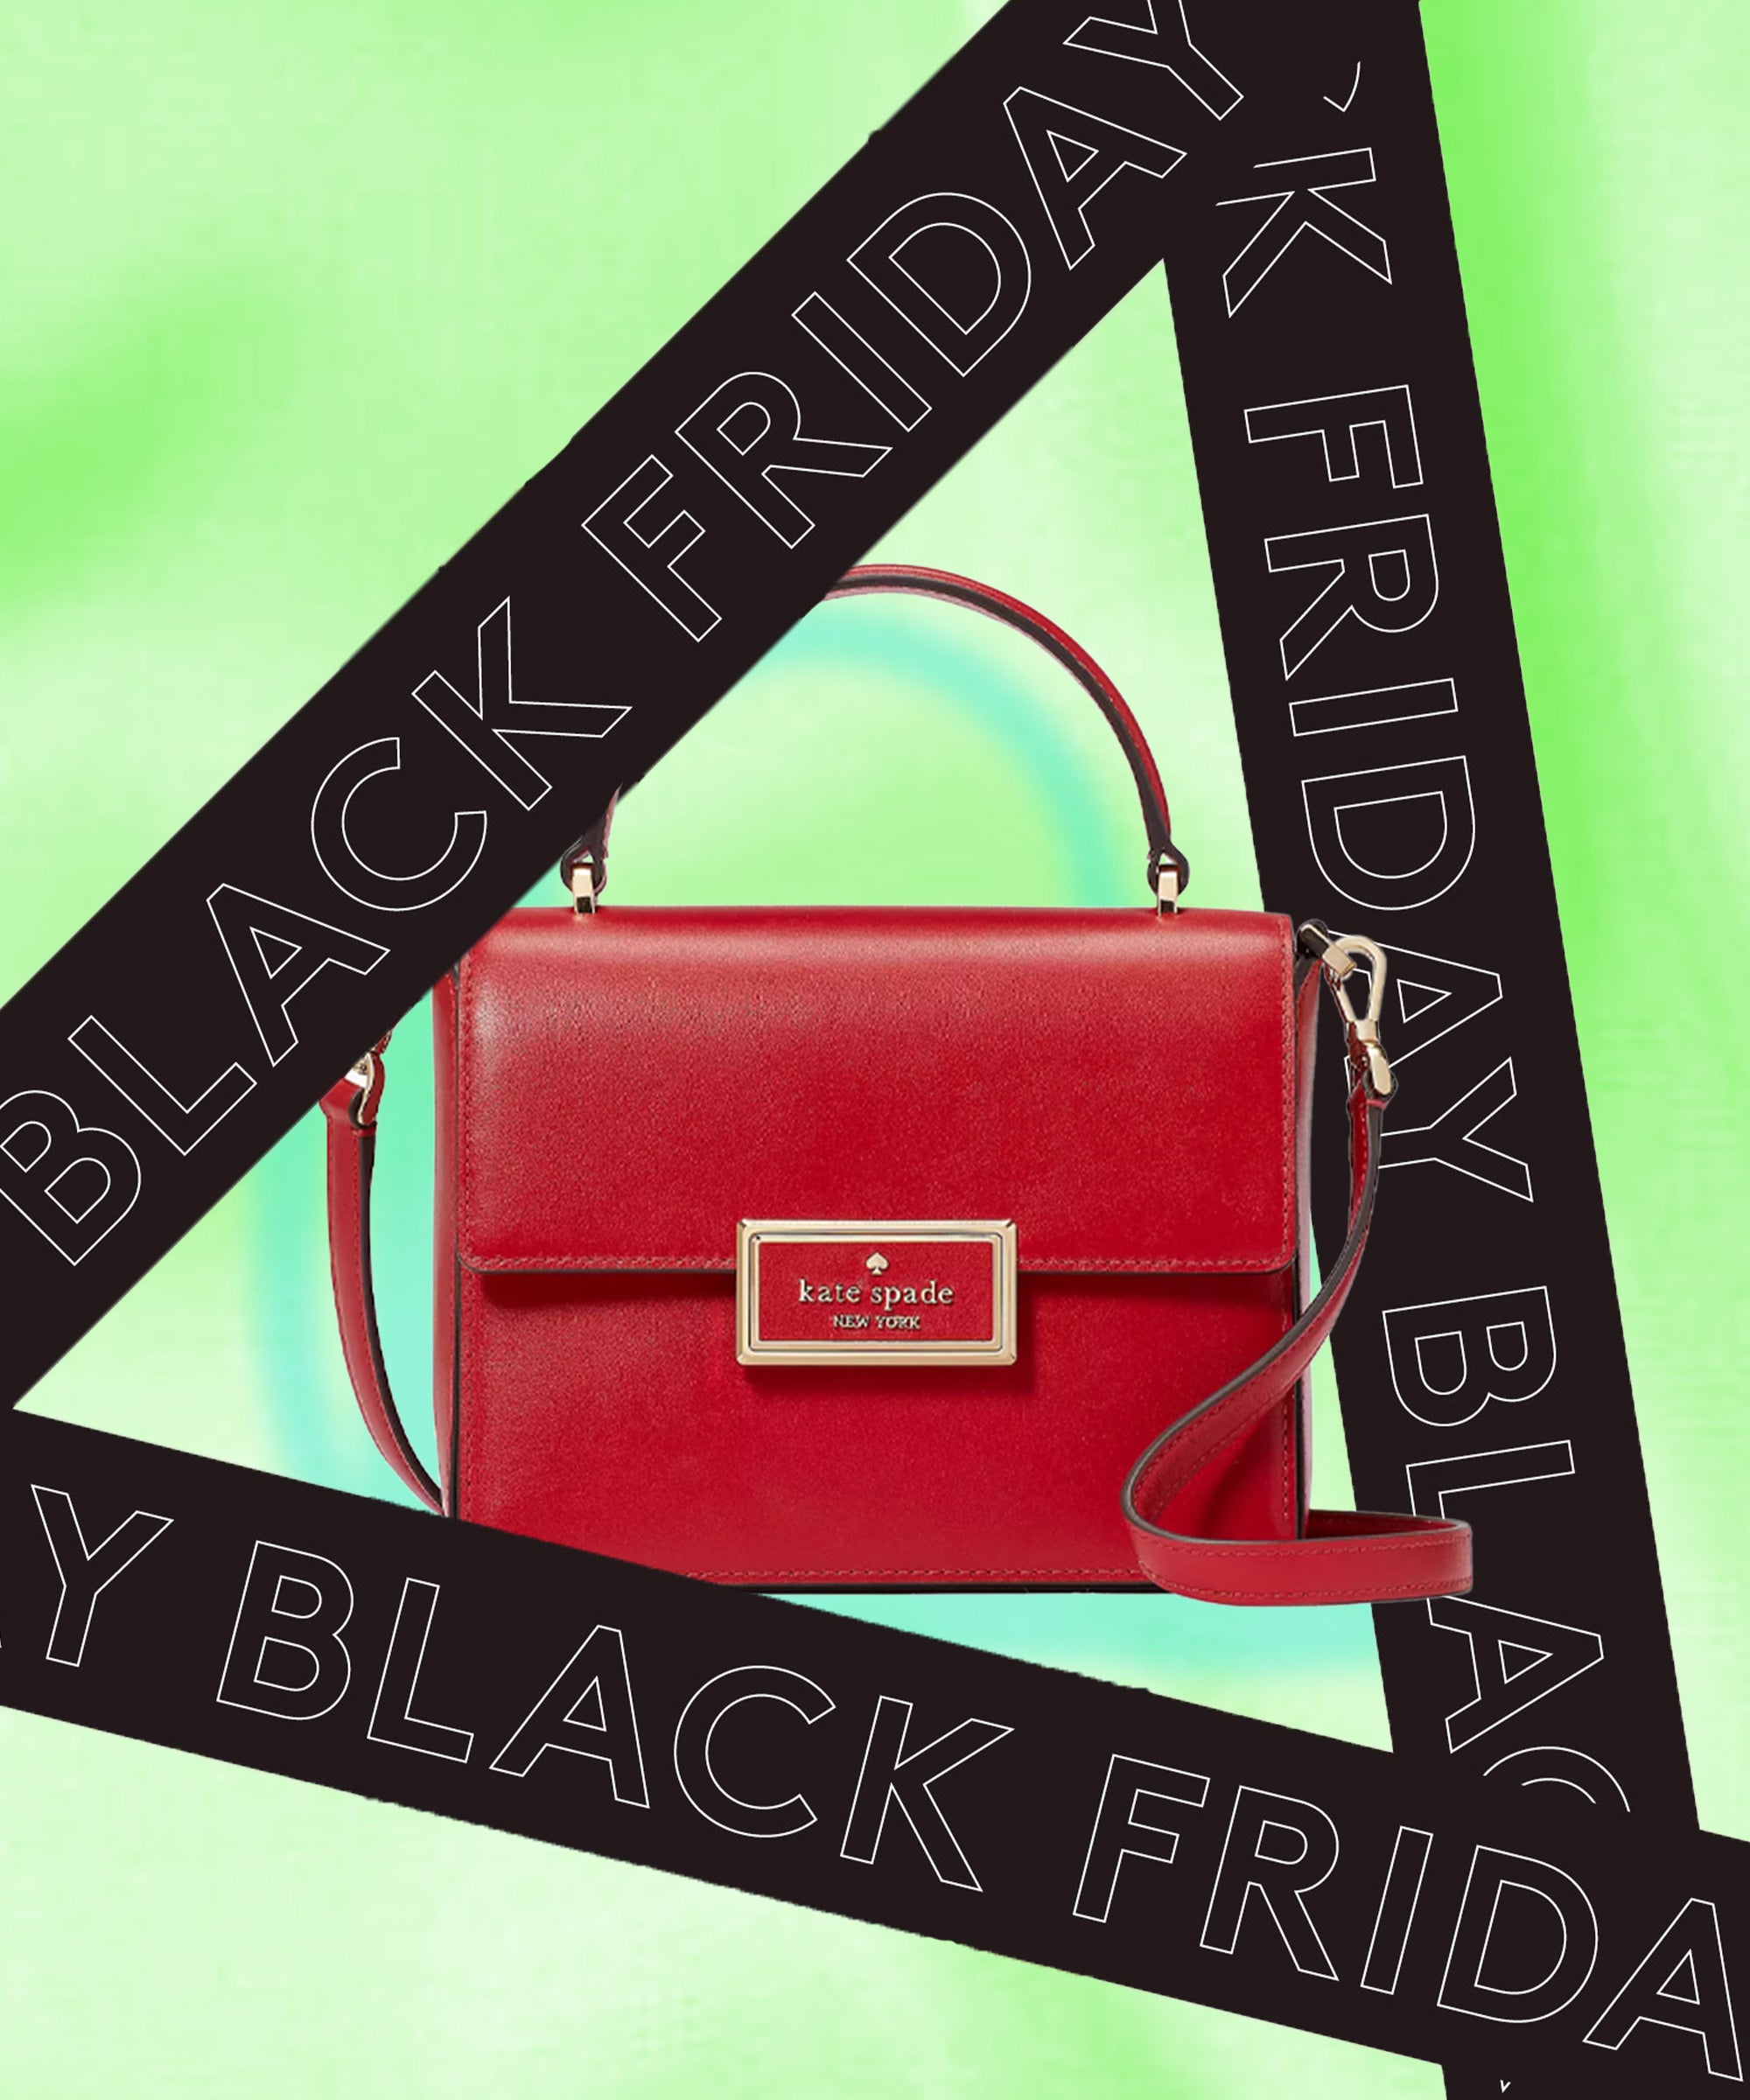 Shop Sale & Clearance on Designer Handbags, Clothing & Gifts | kate spade  new york